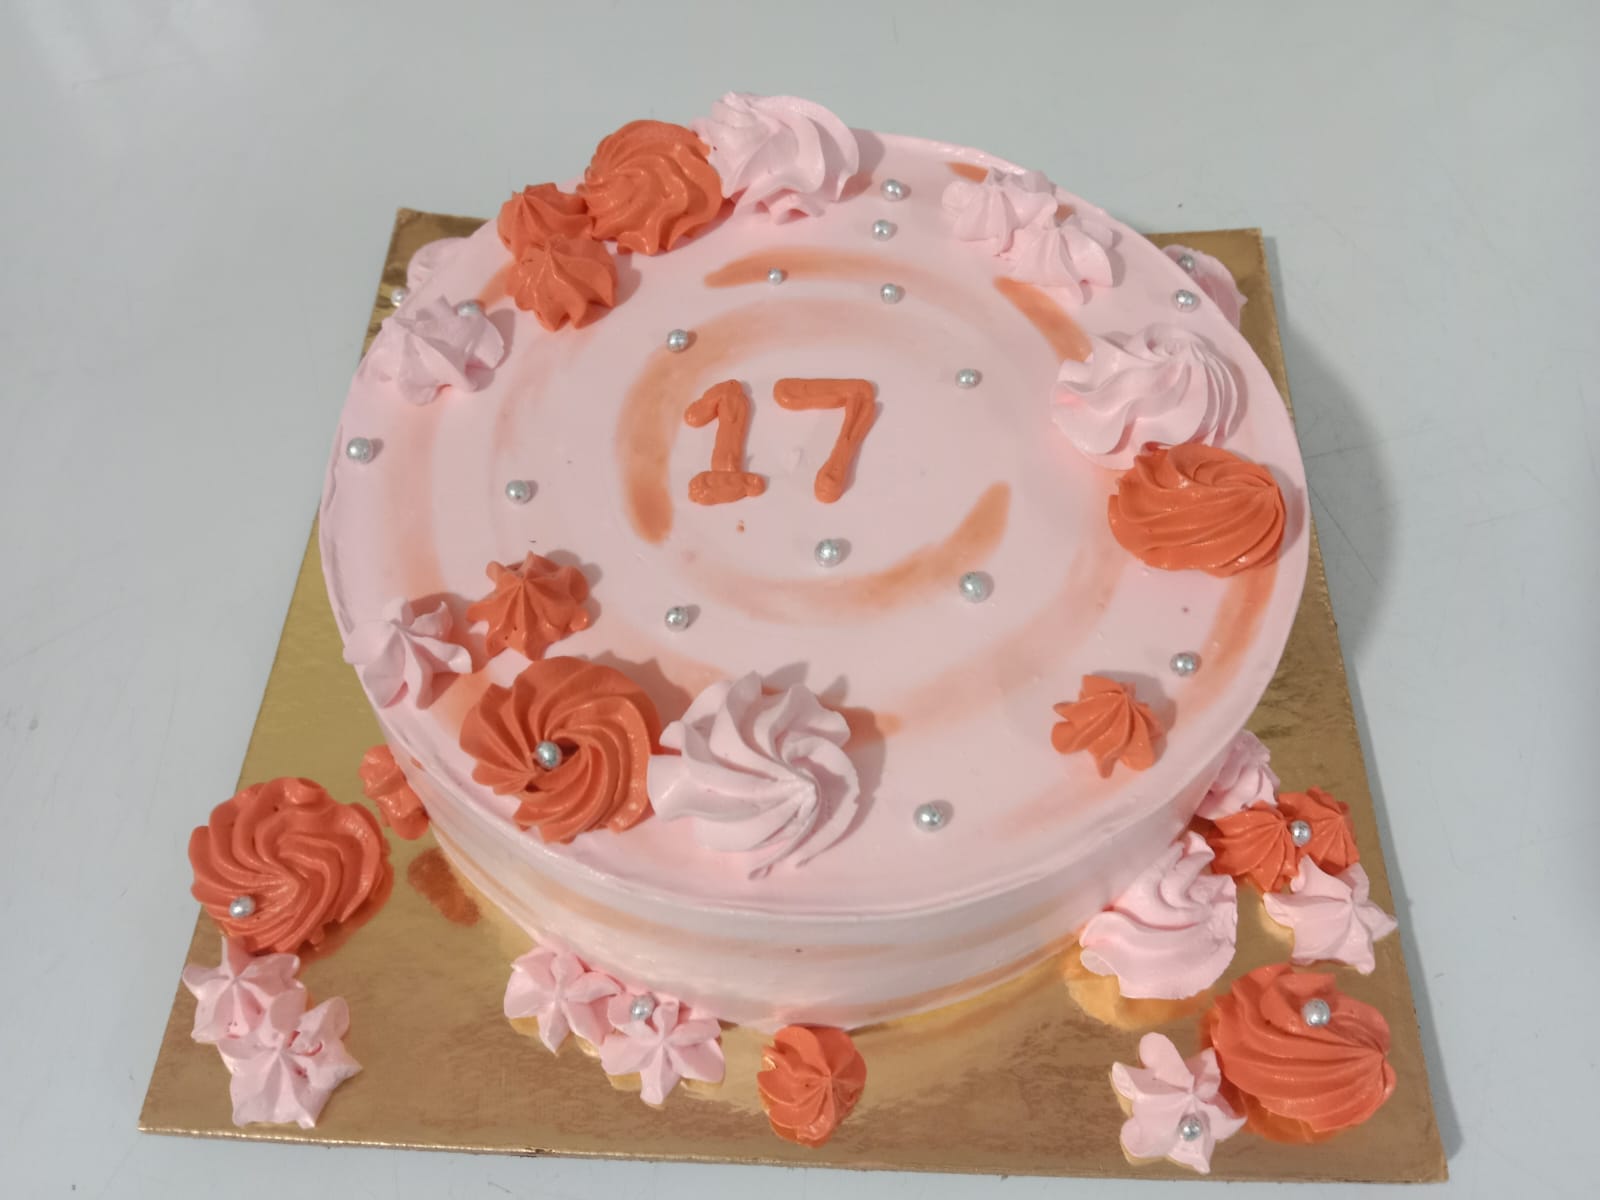 Two tiers cake decorating for Aurelia's sweet 17 birthday and butterfly cake  decorating for Wendeline birthday | Instagram